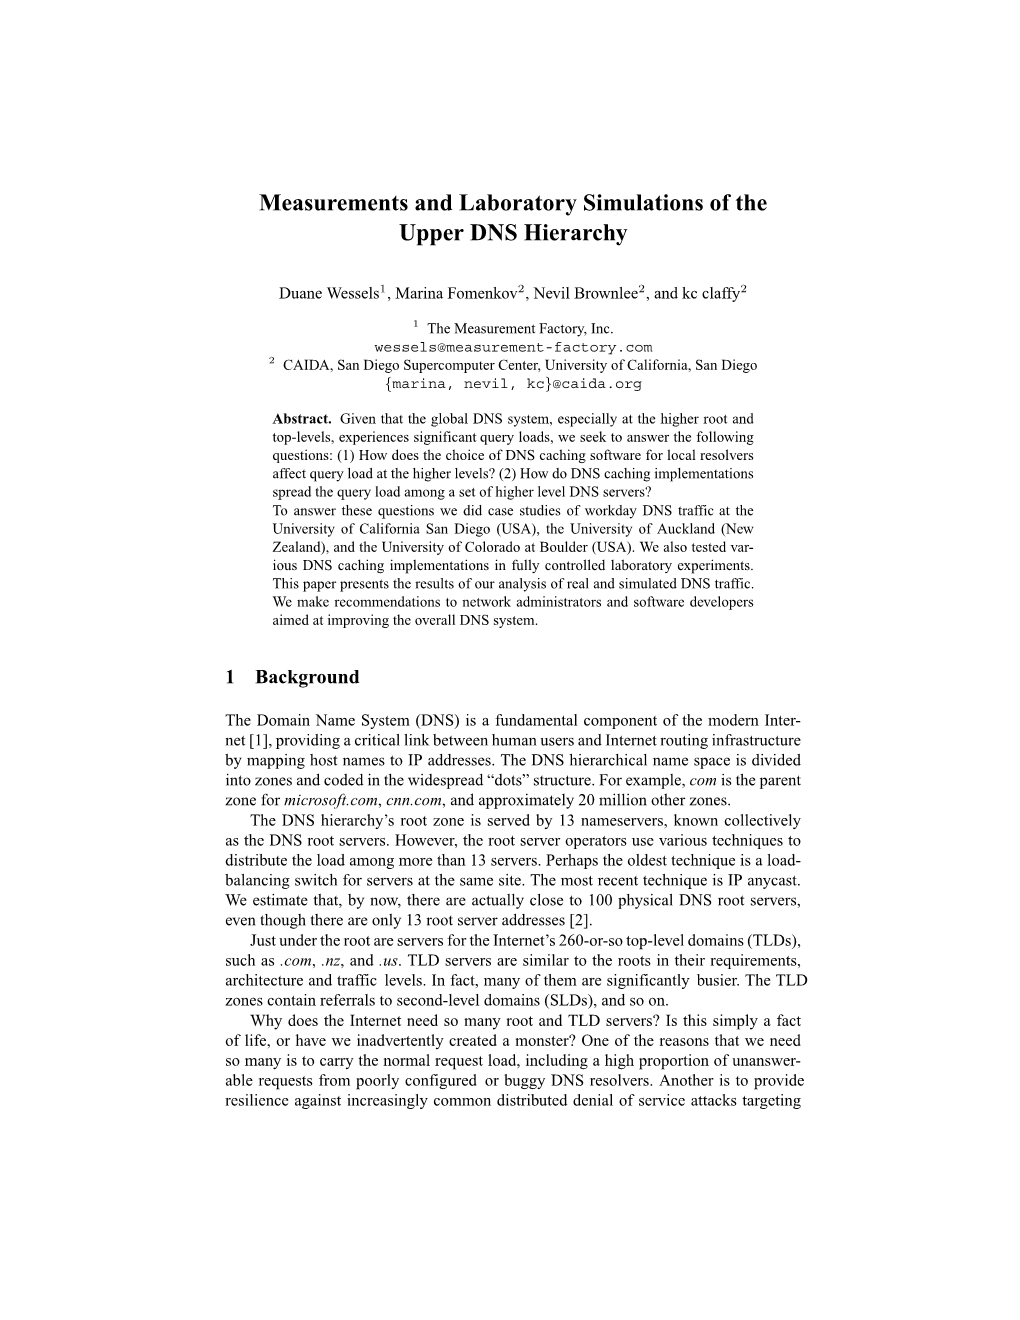 Measurements and Laboratory Simulations of the Upper DNS Hierarchy